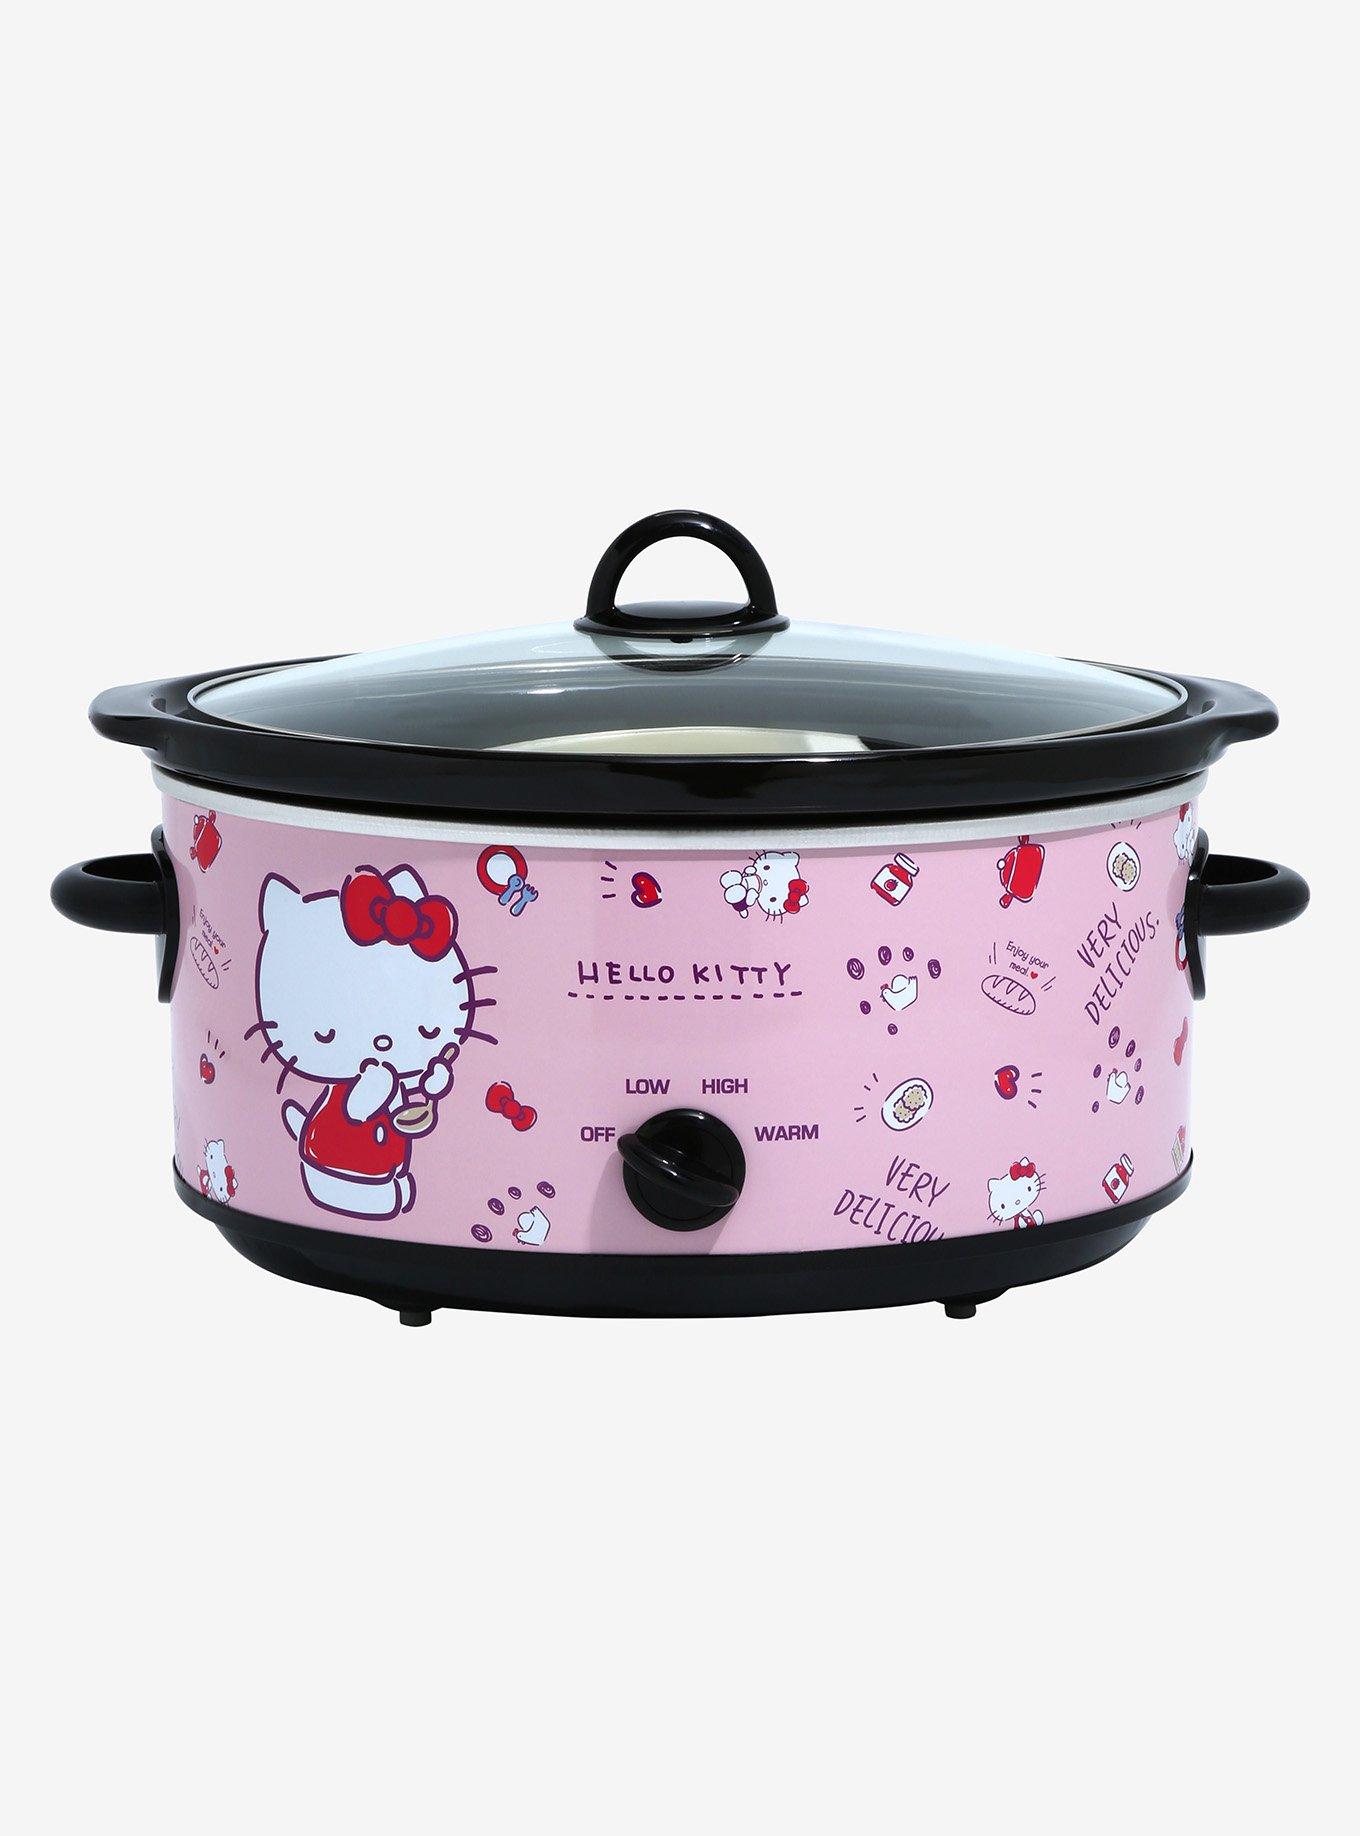 Review Crockpot Electric Lunch Box Food Warmer Blush Pink I LOVE